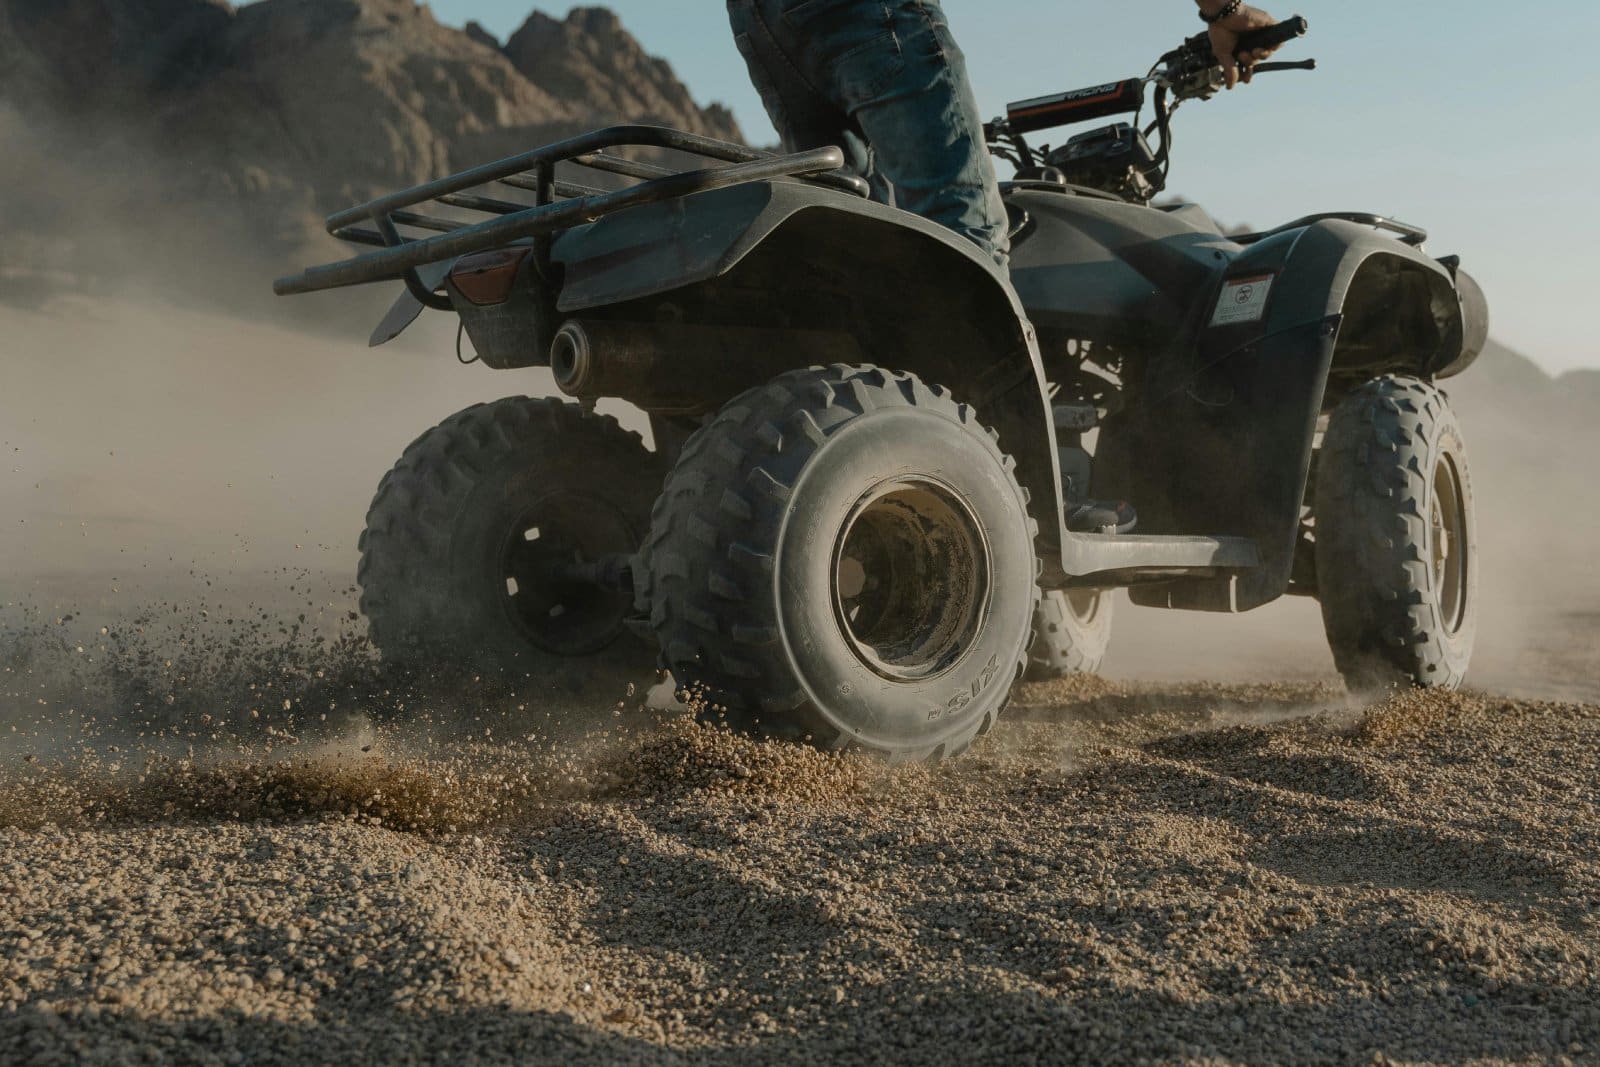 <p><span>Your adventure through these top ATV destinations promises the thrill of off-road exploration and a journey into some of the world’s most breathtaking landscapes. These destinations offer a unique way to connect with nature, whether it’s riding through the red rocks of Moab, the dunes of Dubai, or the rainforests of Costa Rica.</span></p> <p><span>As you prepare for your ATV adventure, remember that each trail offers its own set of challenges and rewards. Embrace the journey, respect the environment, and enjoy the unparalleled freedom of exploring the world on four wheels.</span></p> <p><span>More Articles Like This…</span></p> <p><a href="https://thegreenvoyage.com/barcelona-discover-the-top-10-beach-clubs/"><span>Barcelona: Discover the Top 10 Beach Clubs</span></a></p> <p><a href="https://thegreenvoyage.com/top-destination-cities-to-visit/"><span>2024 Global City Travel Guide – Your Passport to the World’s Top Destination Cities</span></a></p> <p><a href="https://thegreenvoyage.com/exploring-khao-yai-a-hidden-gem-of-thailand/"><span>Exploring Khao Yai 2024 – A Hidden Gem of Thailand</span></a></p> <p><span>The post <a href="https://passingthru.com/atv-adventure-destinations/">Off-Road Thrills: Top 10 ATV Adventure Destinations</a> republished on </span><a href="https://passingthru.com/"><span>Passing Thru</span></a><span> with permission from </span><a href="https://thegreenvoyage.com/"><span>The Green Voyage</span></a><span>.</span></p> <p><span>Featured Image Credit: Shutterstock / FOTOGRIN.</span></p> <p><span>For transparency, this content was partly developed with AI assistance and carefully curated by an experienced editor to be informative and ensure accuracy.</span></p>